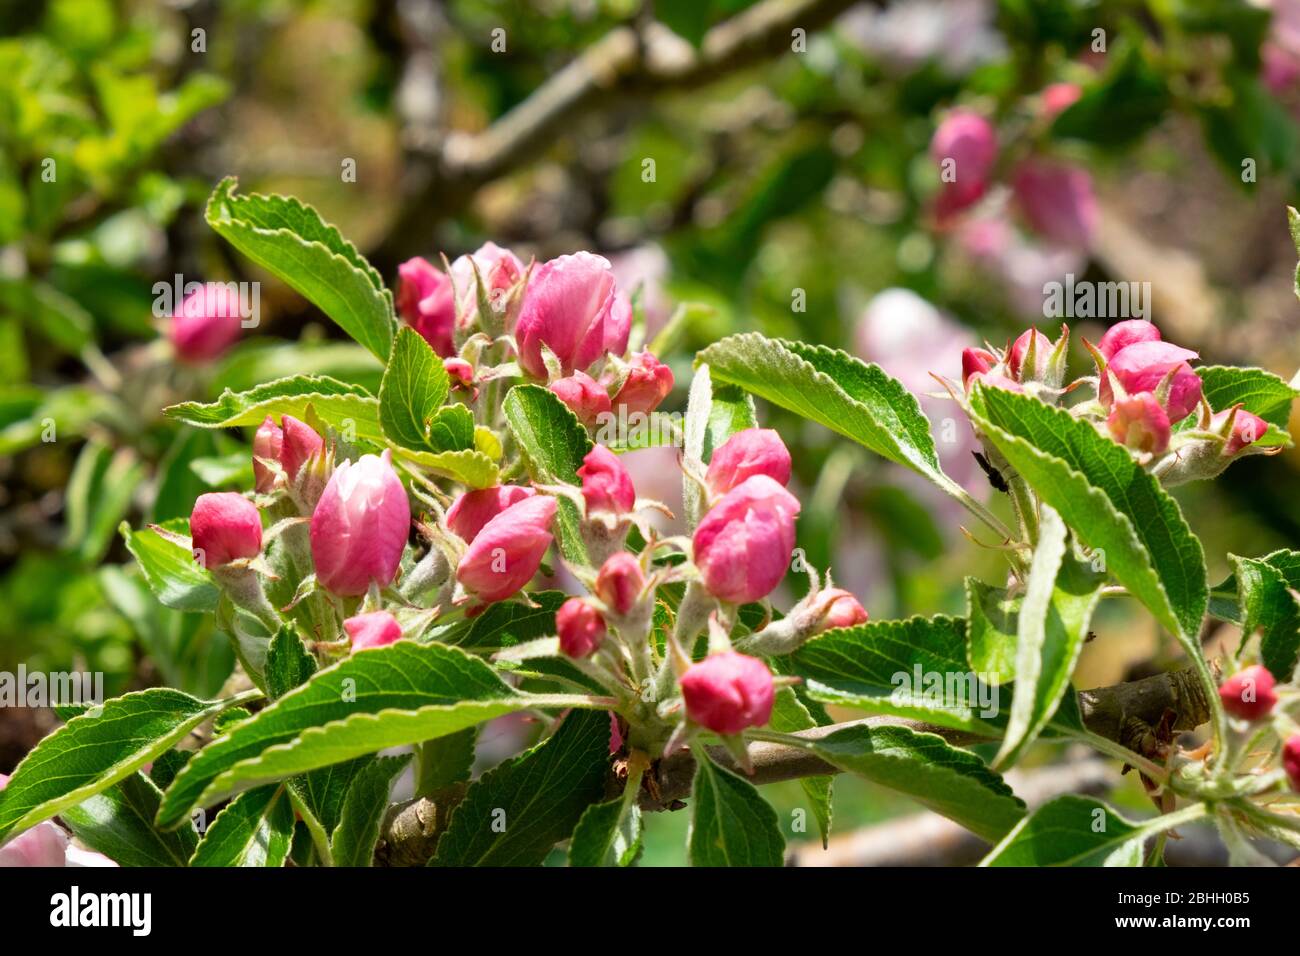 Pink apple blossom blossoms buds closed up on an apple tree in sunshine on sunny spring day April day in garden Carmarthenshire Wales UK  KATHY DEWITT Stock Photo